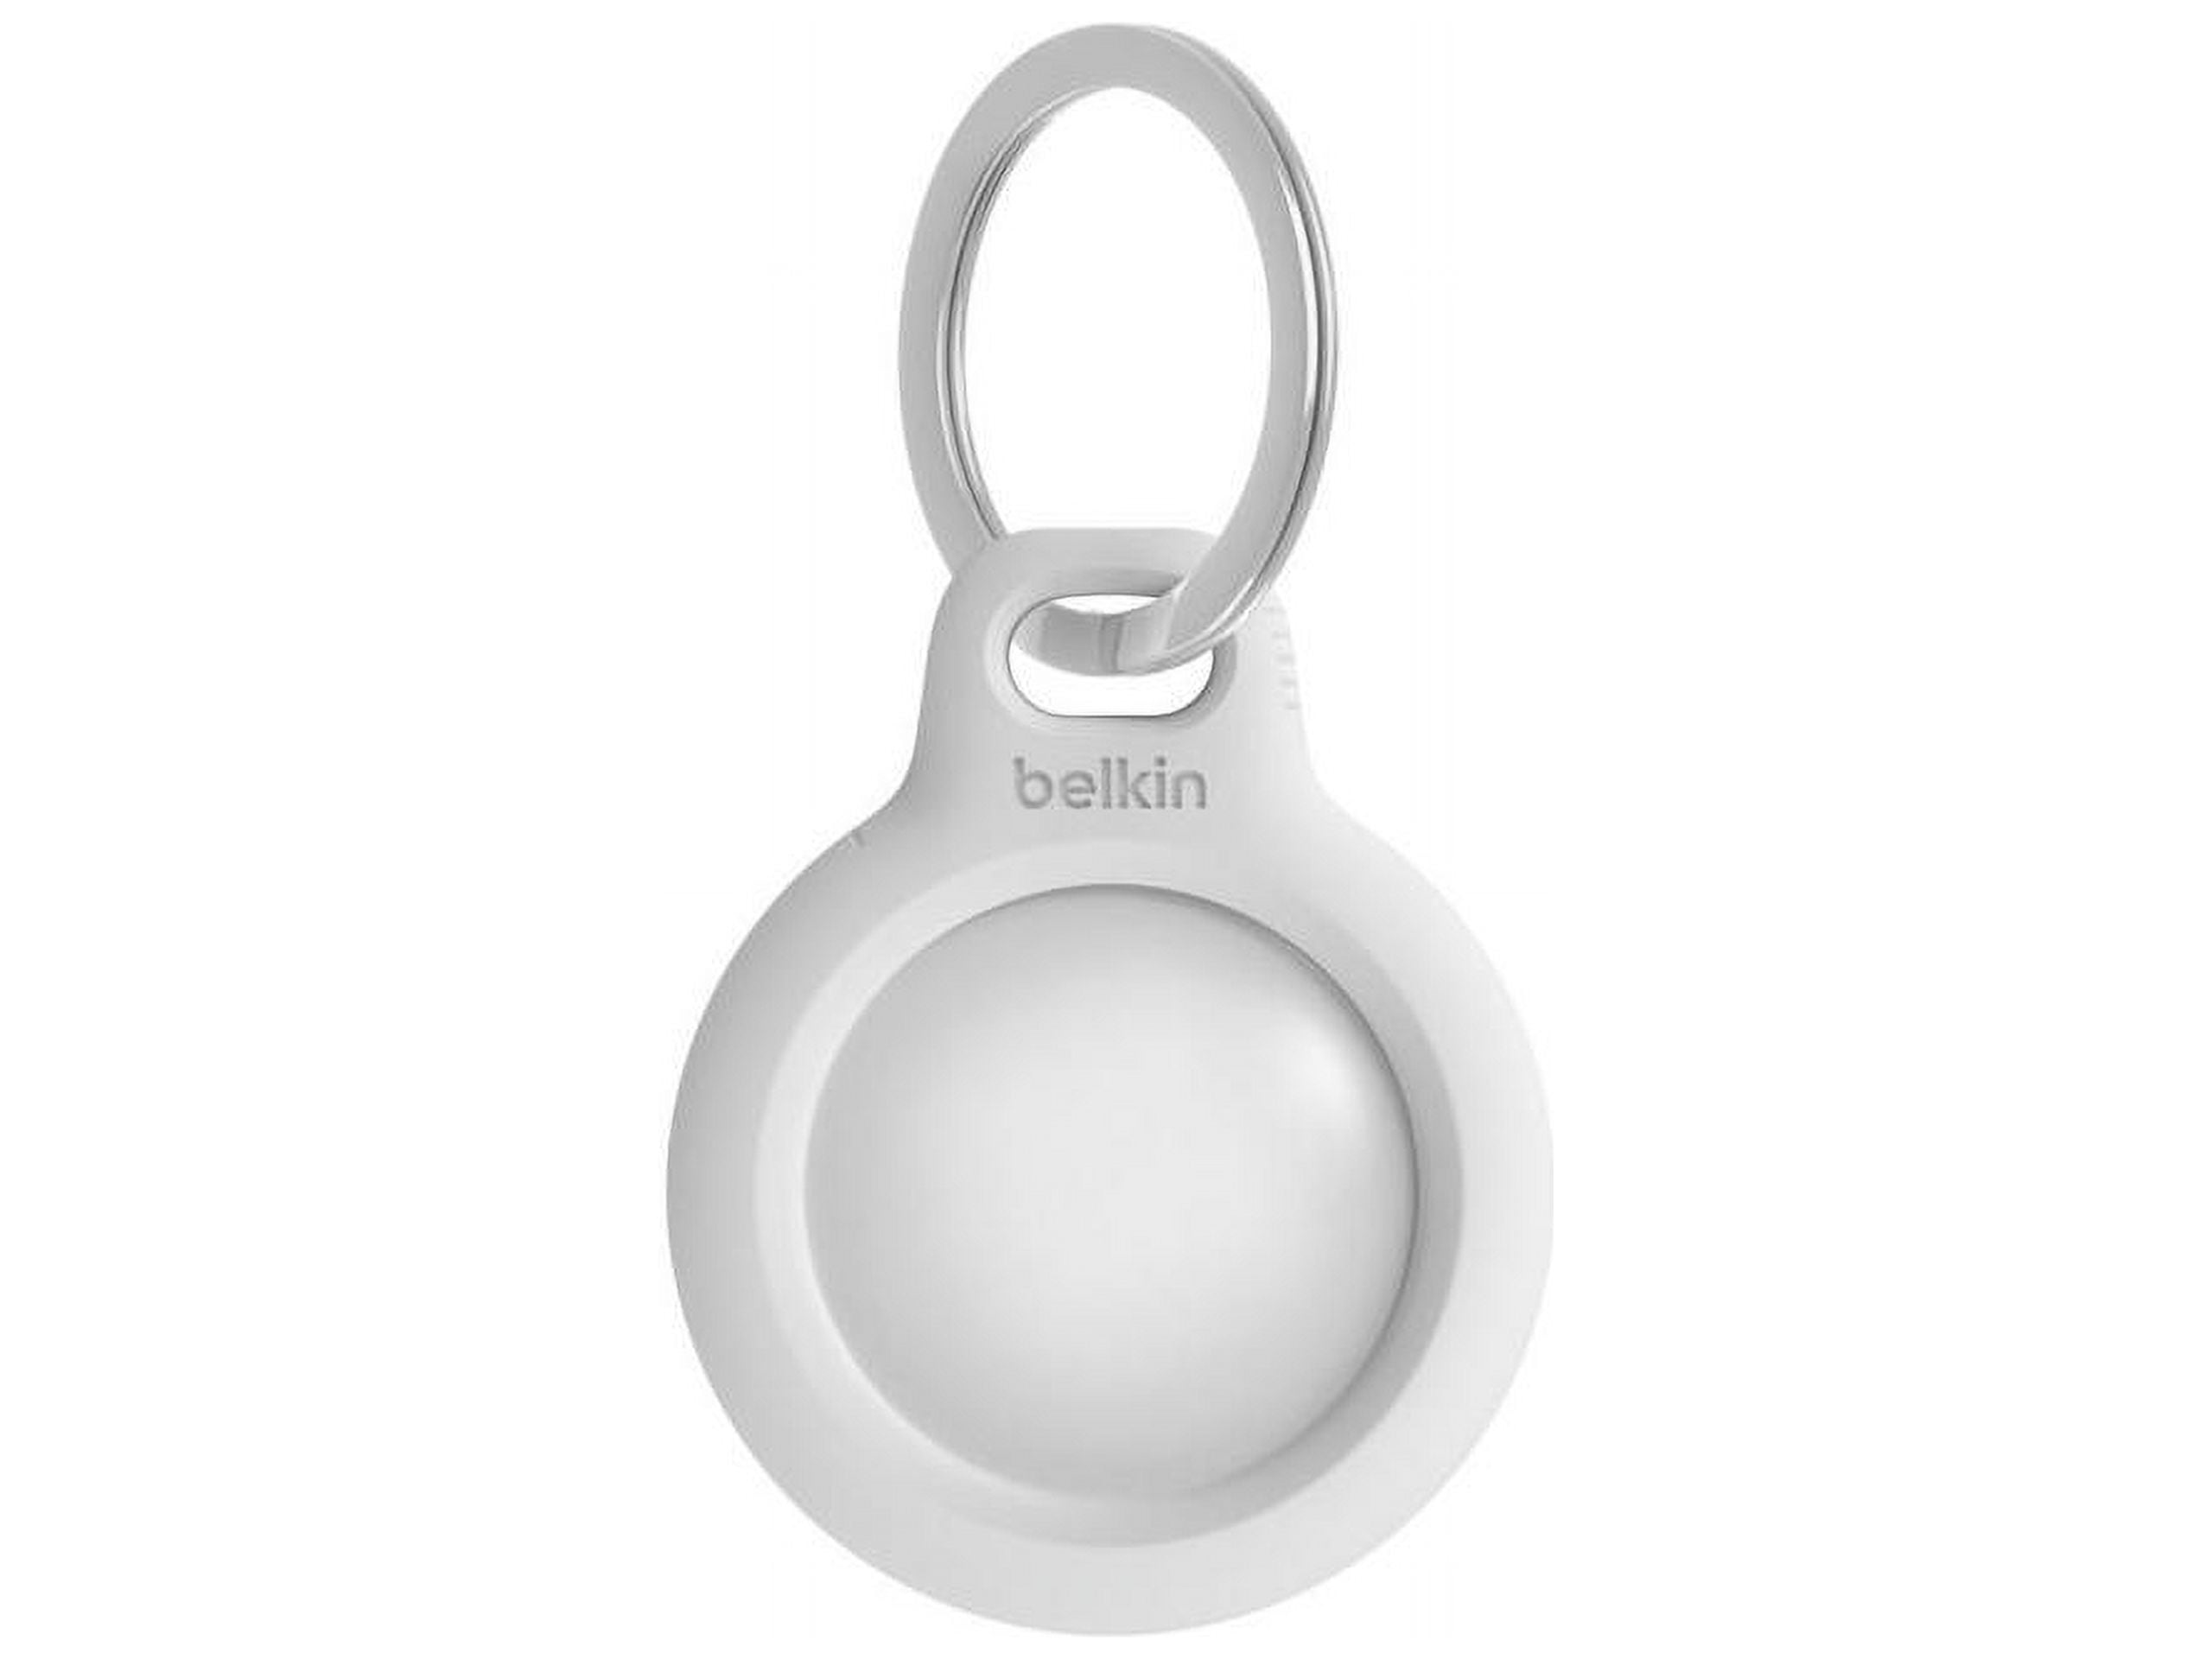 Belkin Mobile Belkin Secure Holder with Key Ring for AirTag